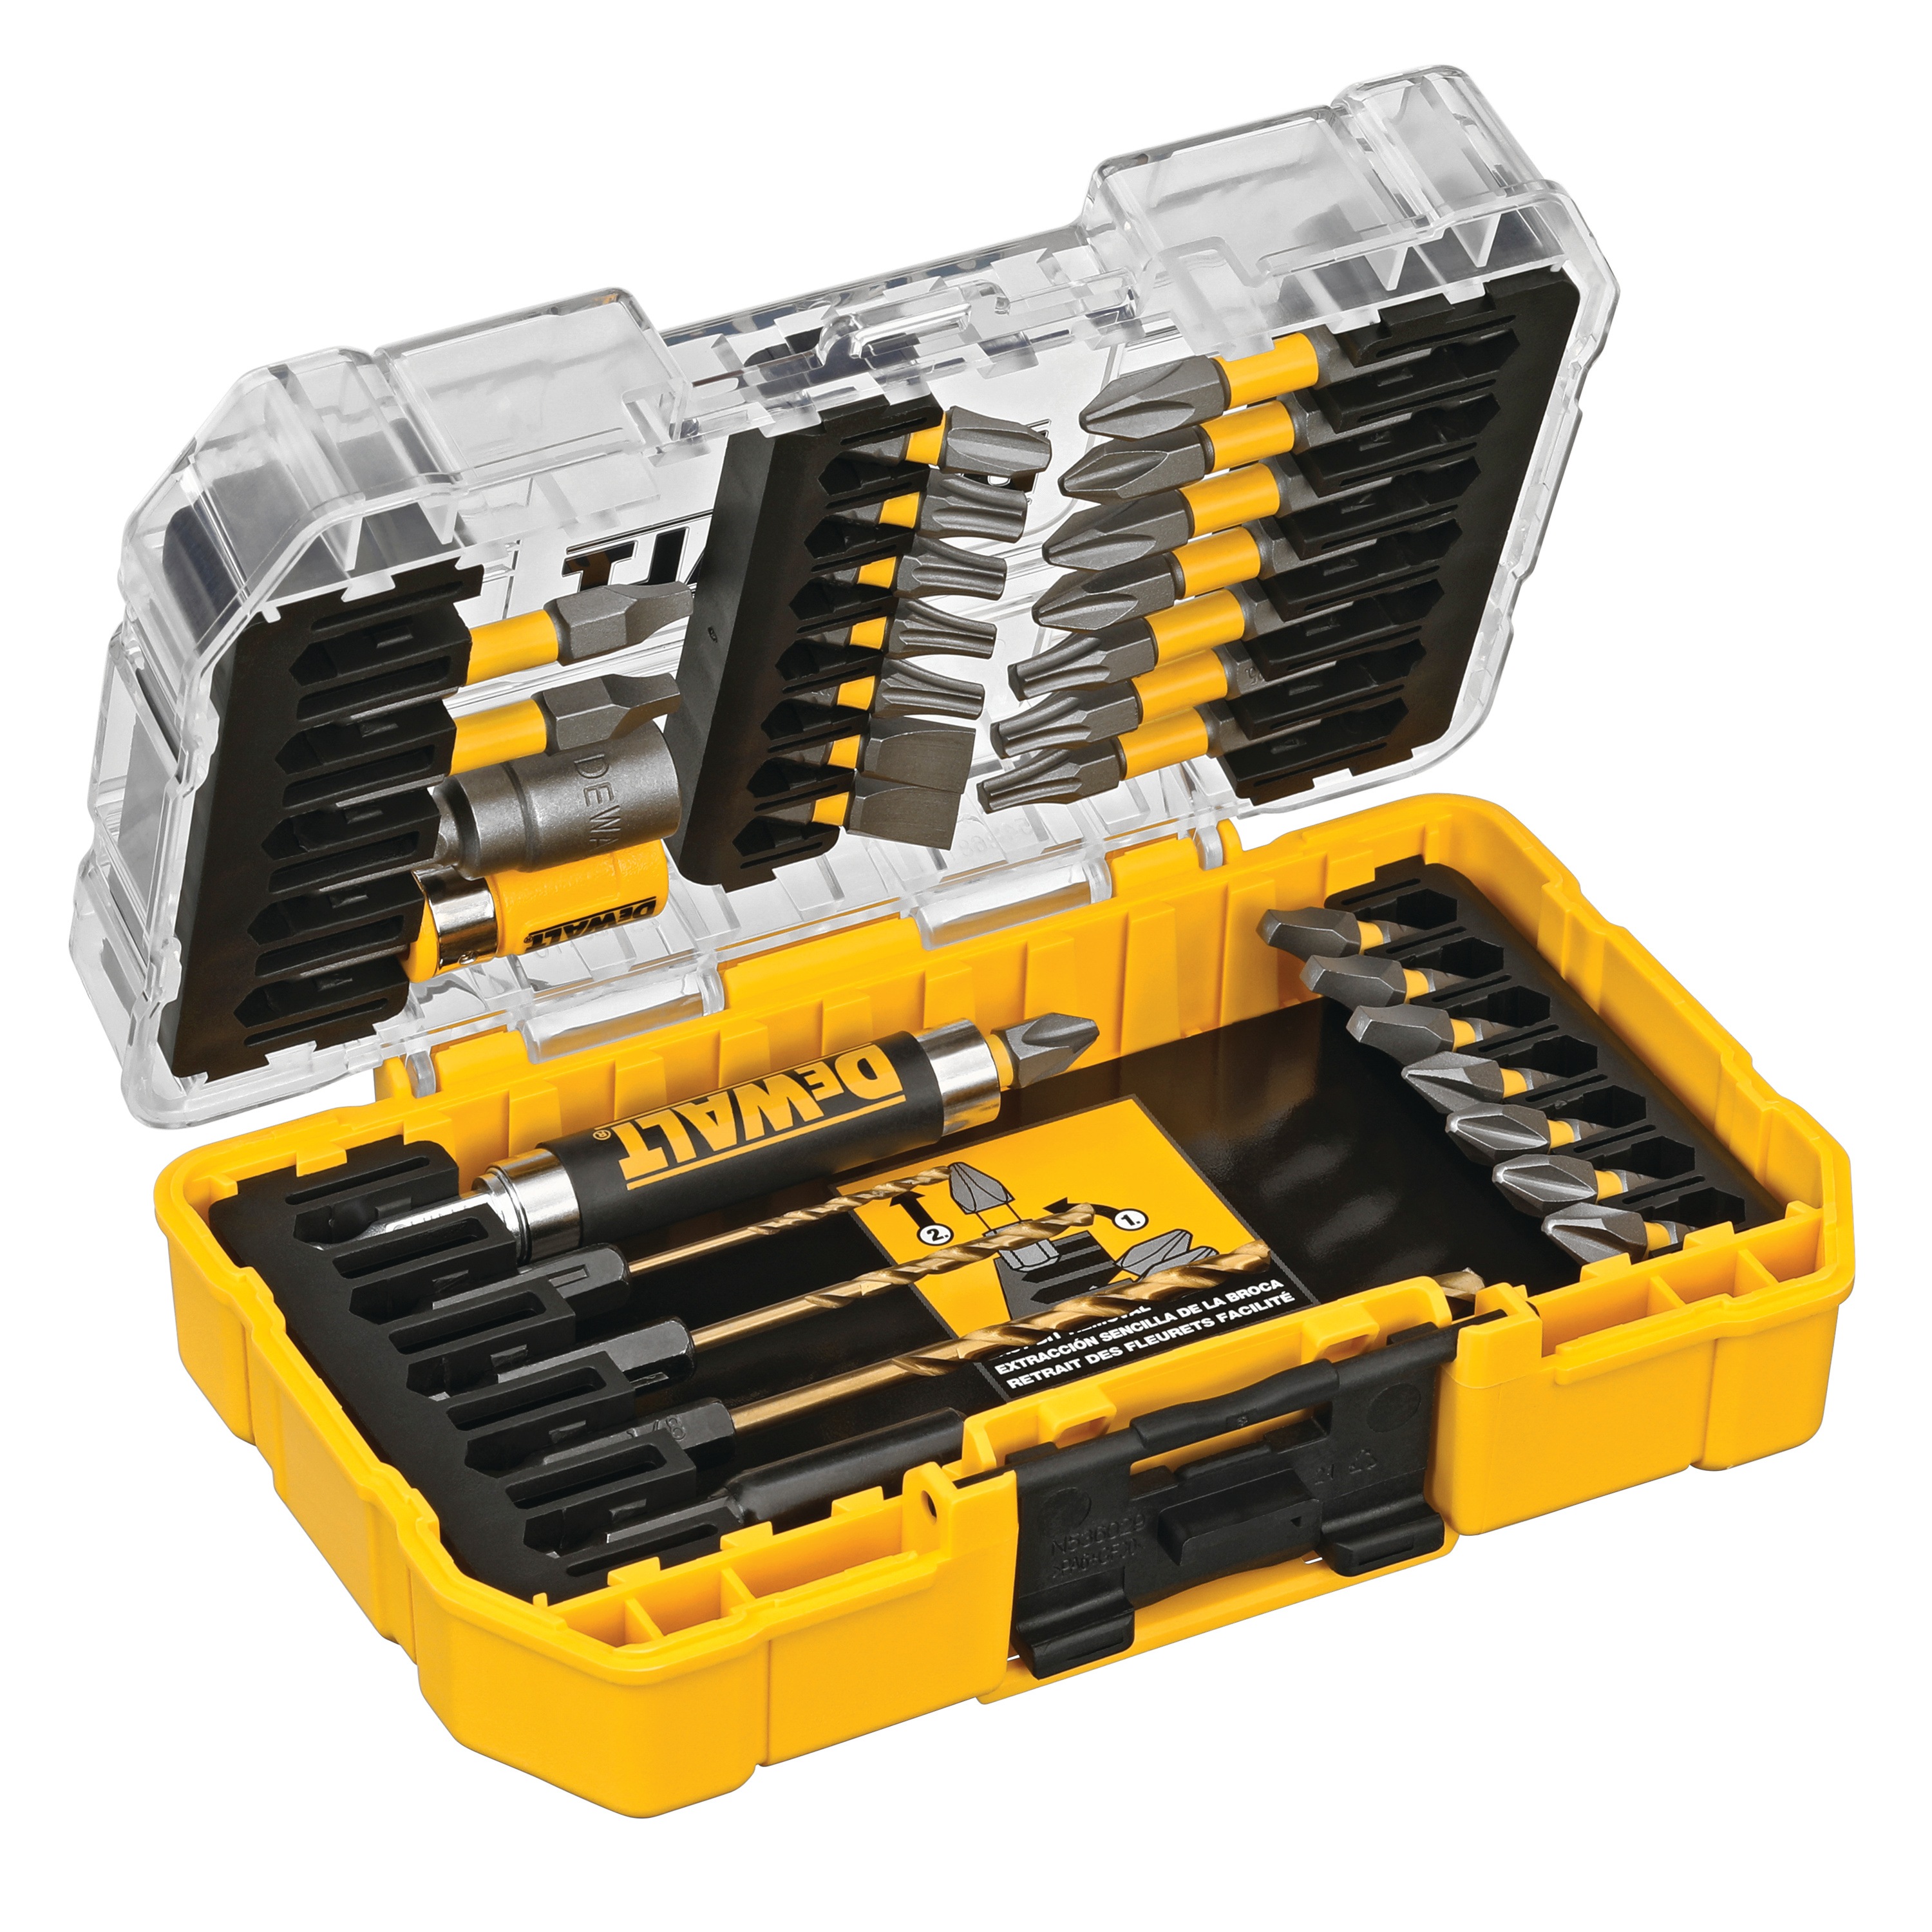 profile of 32 piece Screw Lock Set with sleeve in a open case.